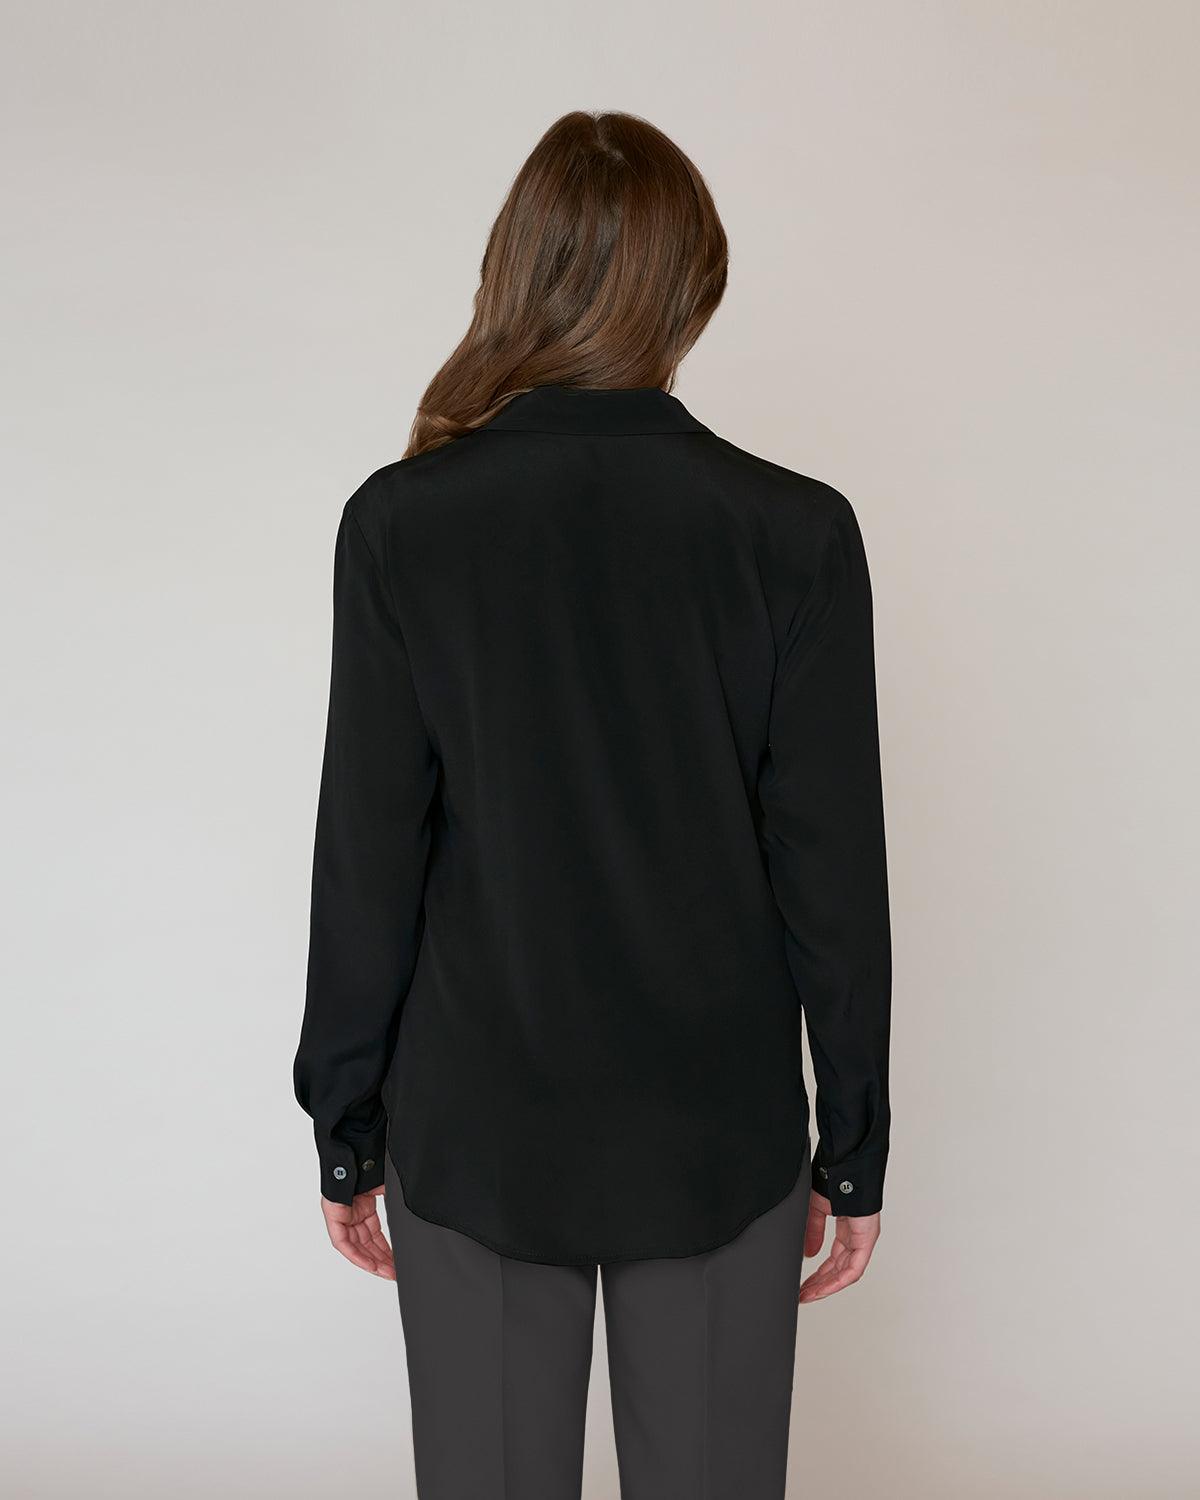 "#color_BLACK| Siobhan is 5'8.5", wearing a size S